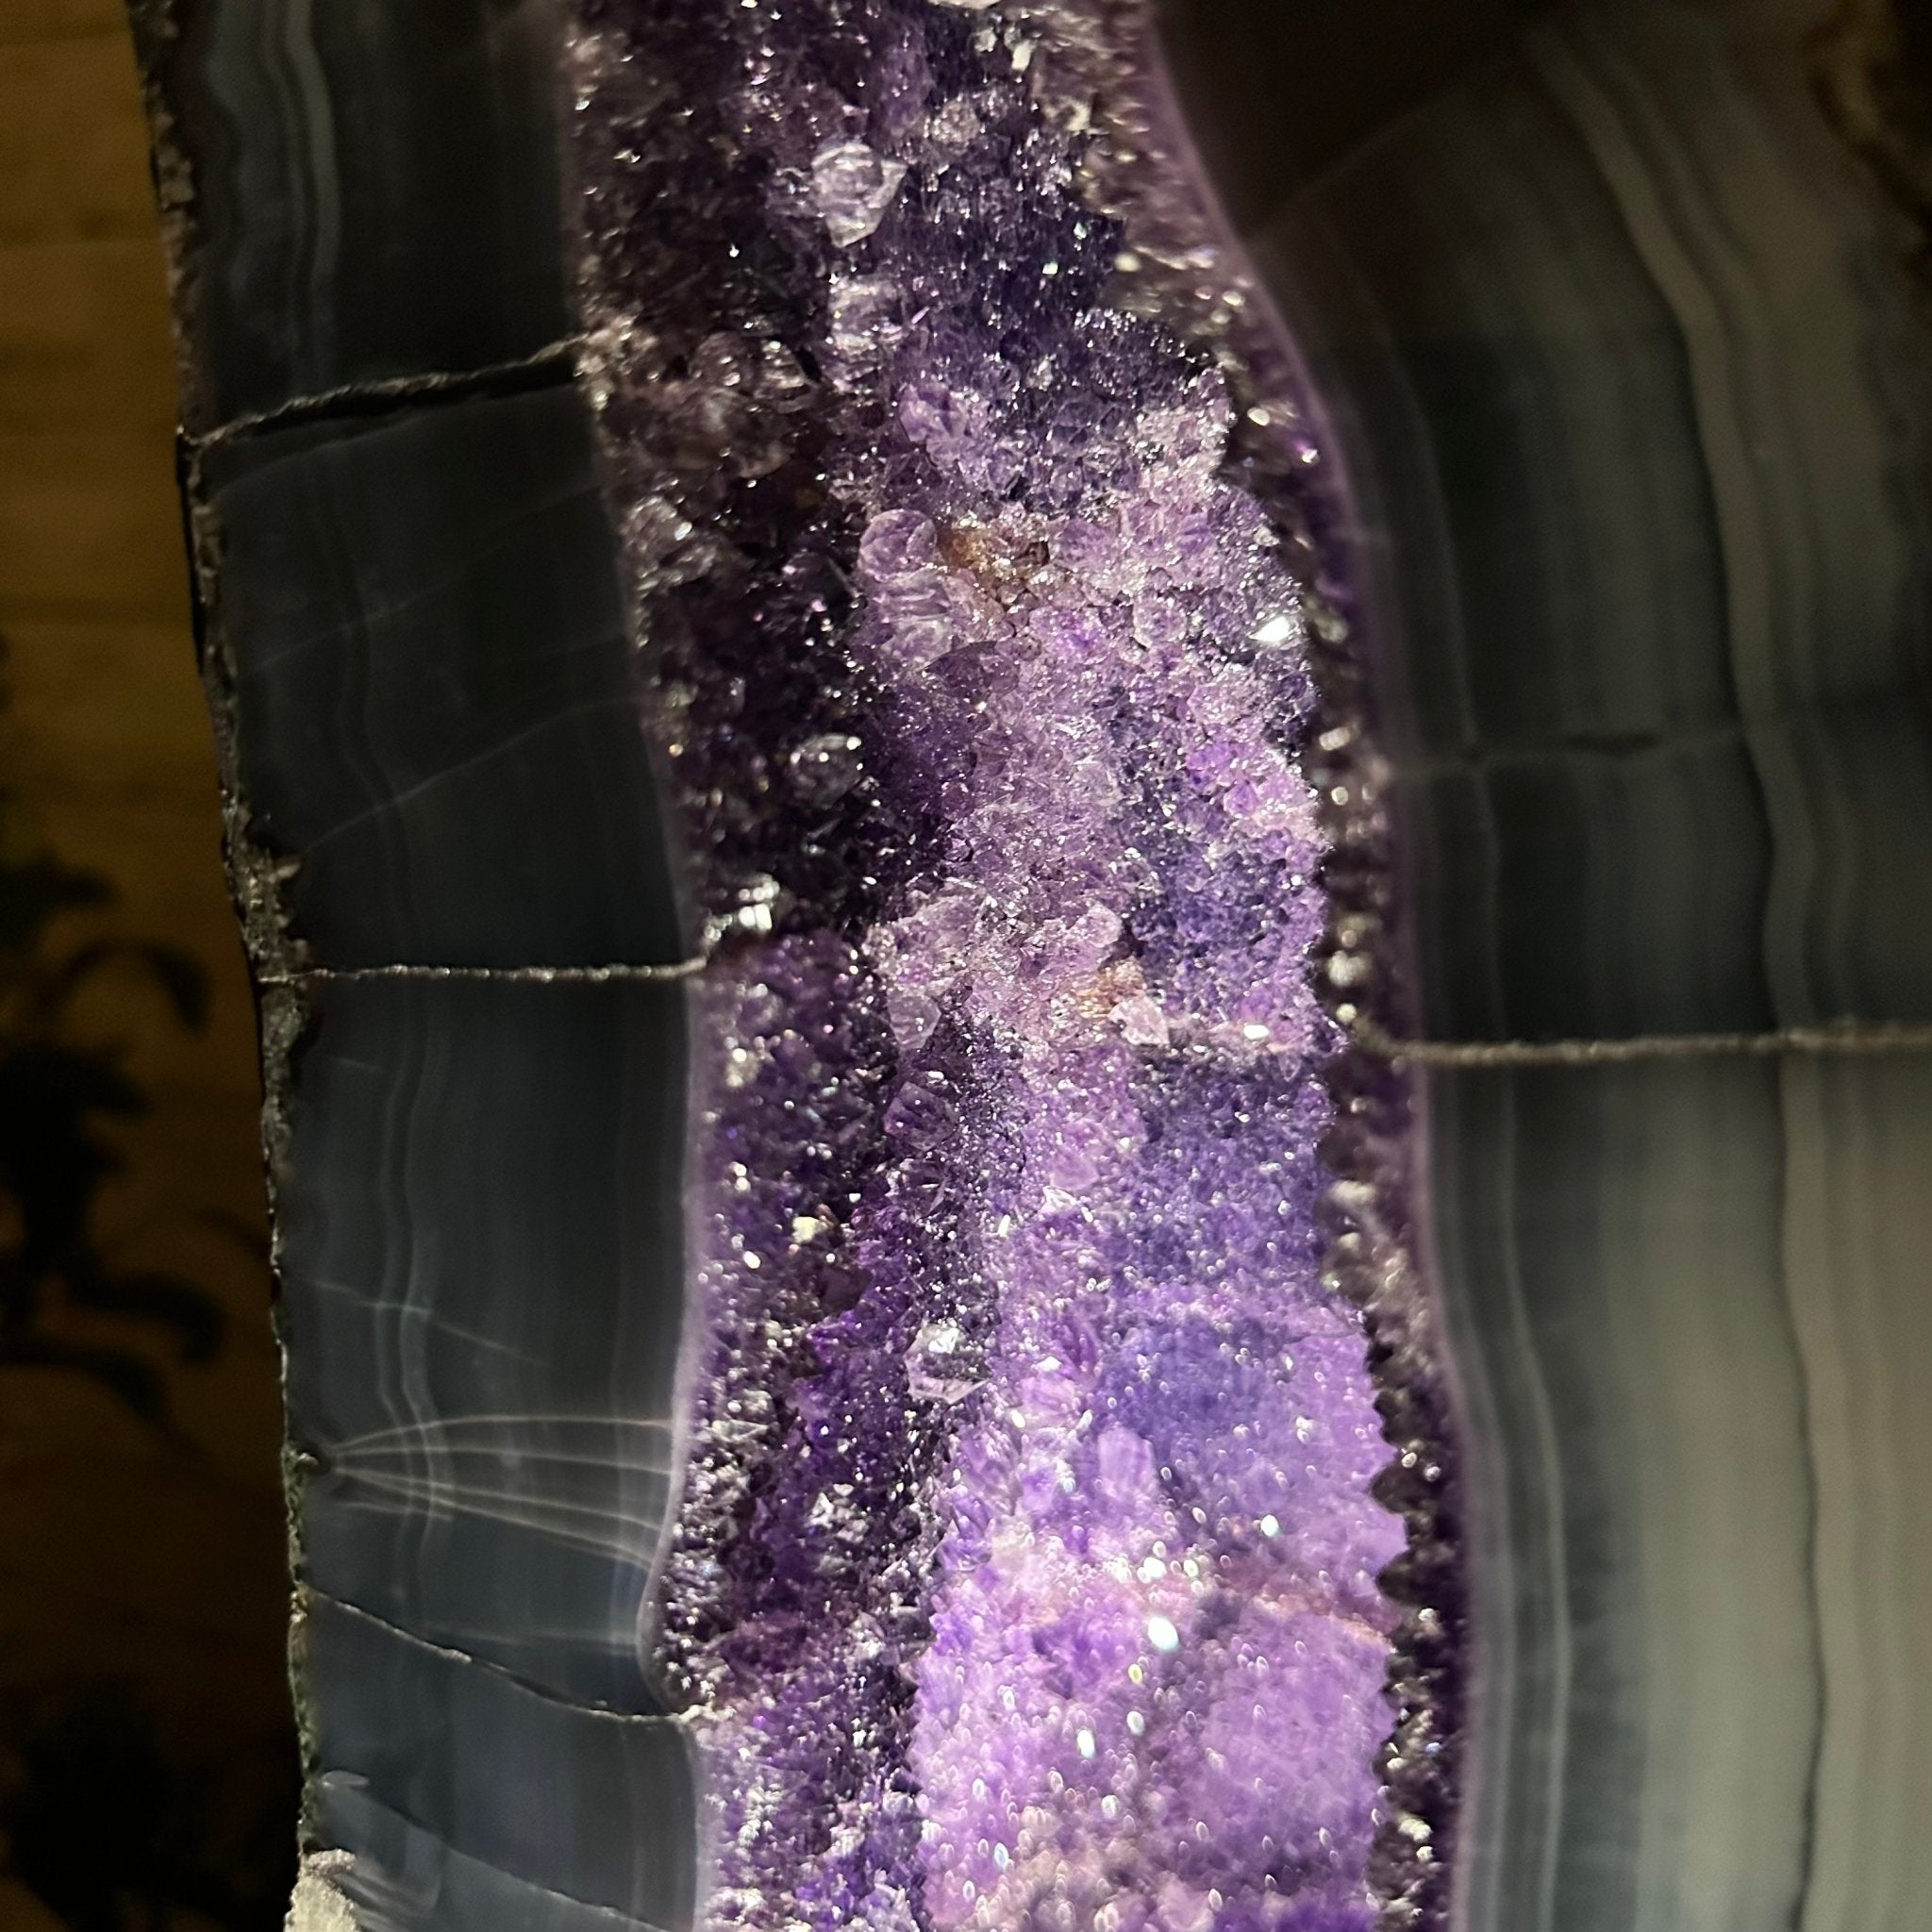 Extra Quality Brazilian Amethyst Cathedral, 79.6 lbs & 23" Tall, Model #5601-0826 by Brazil Gems - Brazil GemsBrazil GemsExtra Quality Brazilian Amethyst Cathedral, 79.6 lbs & 23" Tall, Model #5601-0826 by Brazil GemsCathedrals5601-0826